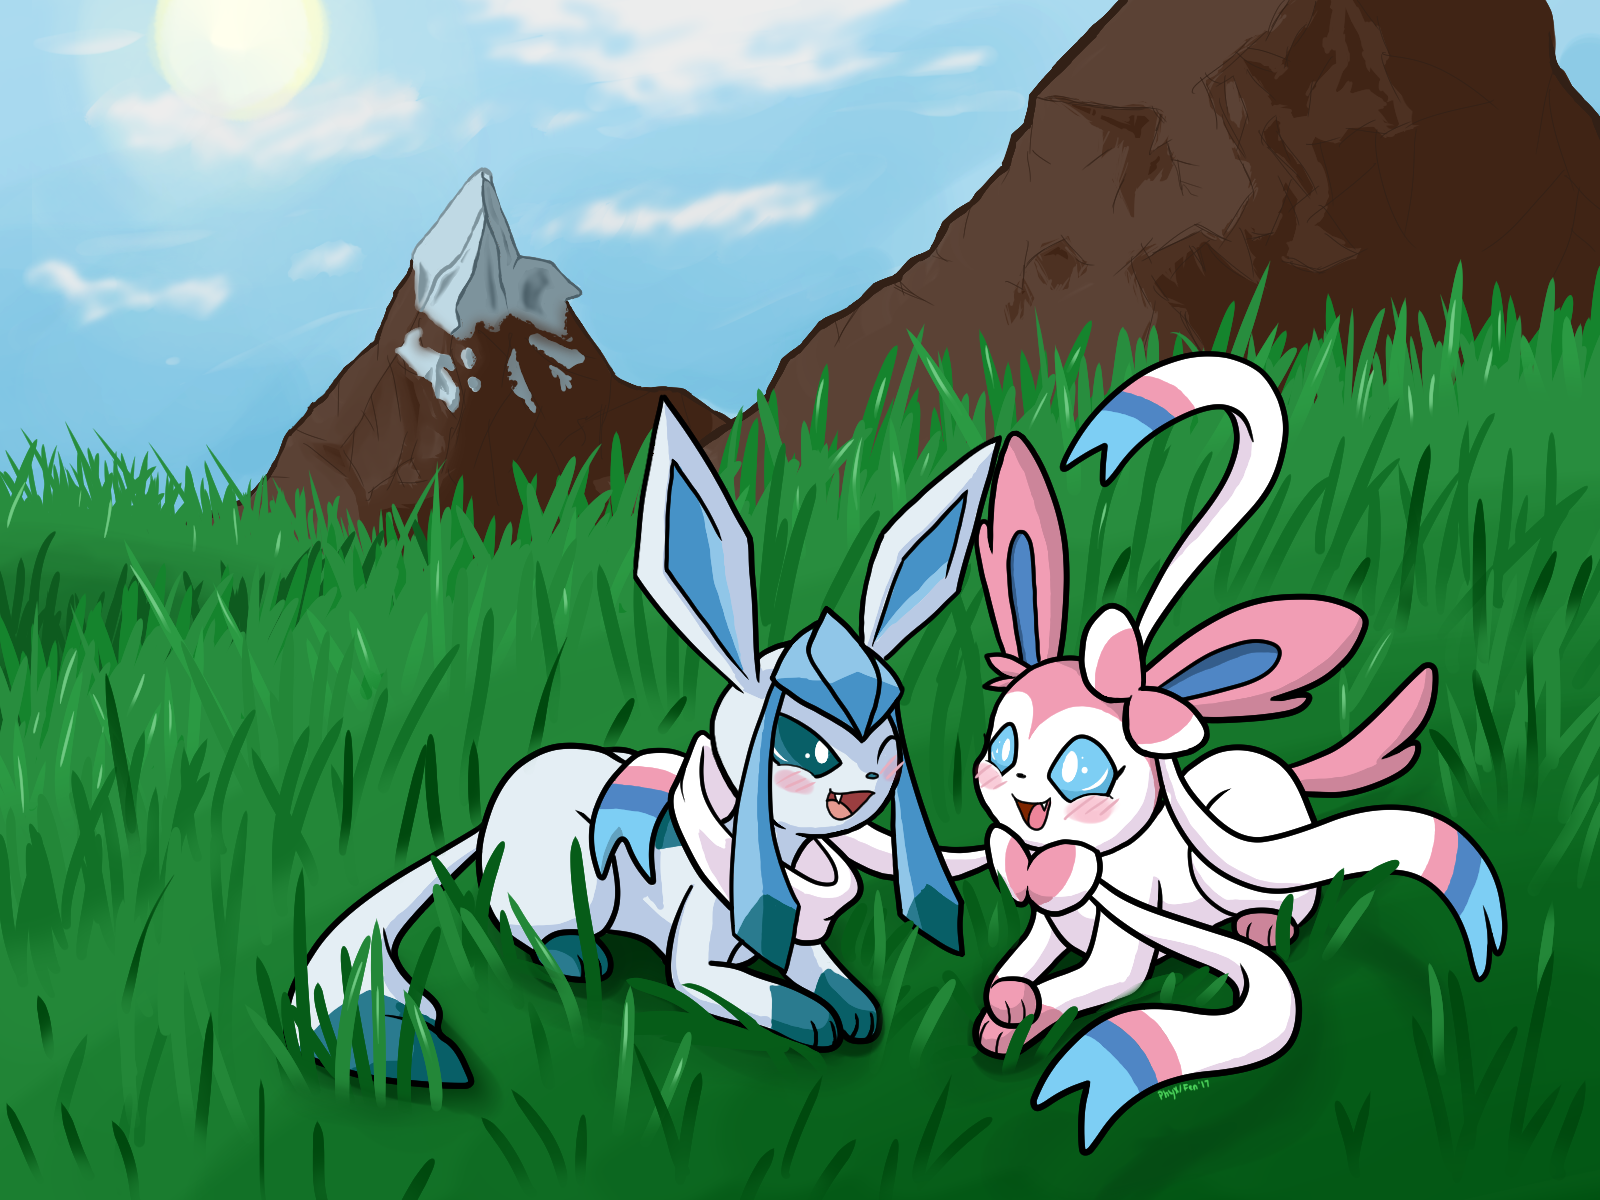 Leafeon Glaceon Sylveon Related Keywords & Suggestions - Lea